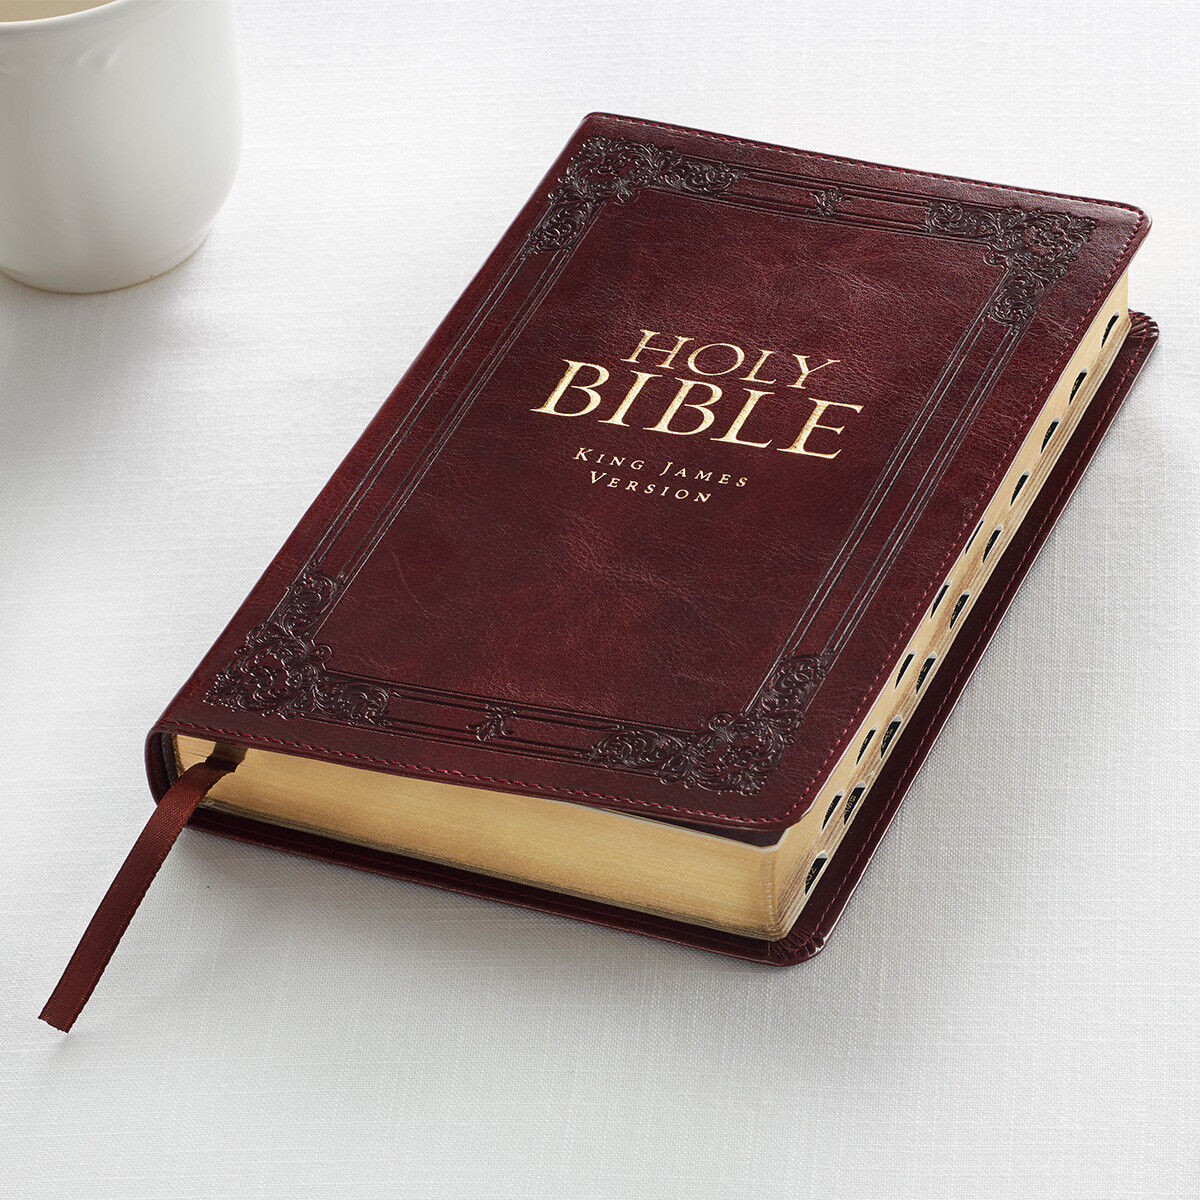  Holy Bible King James Version Thumb Indexed Burgundy Faux Leather Gift Bible Без бренда